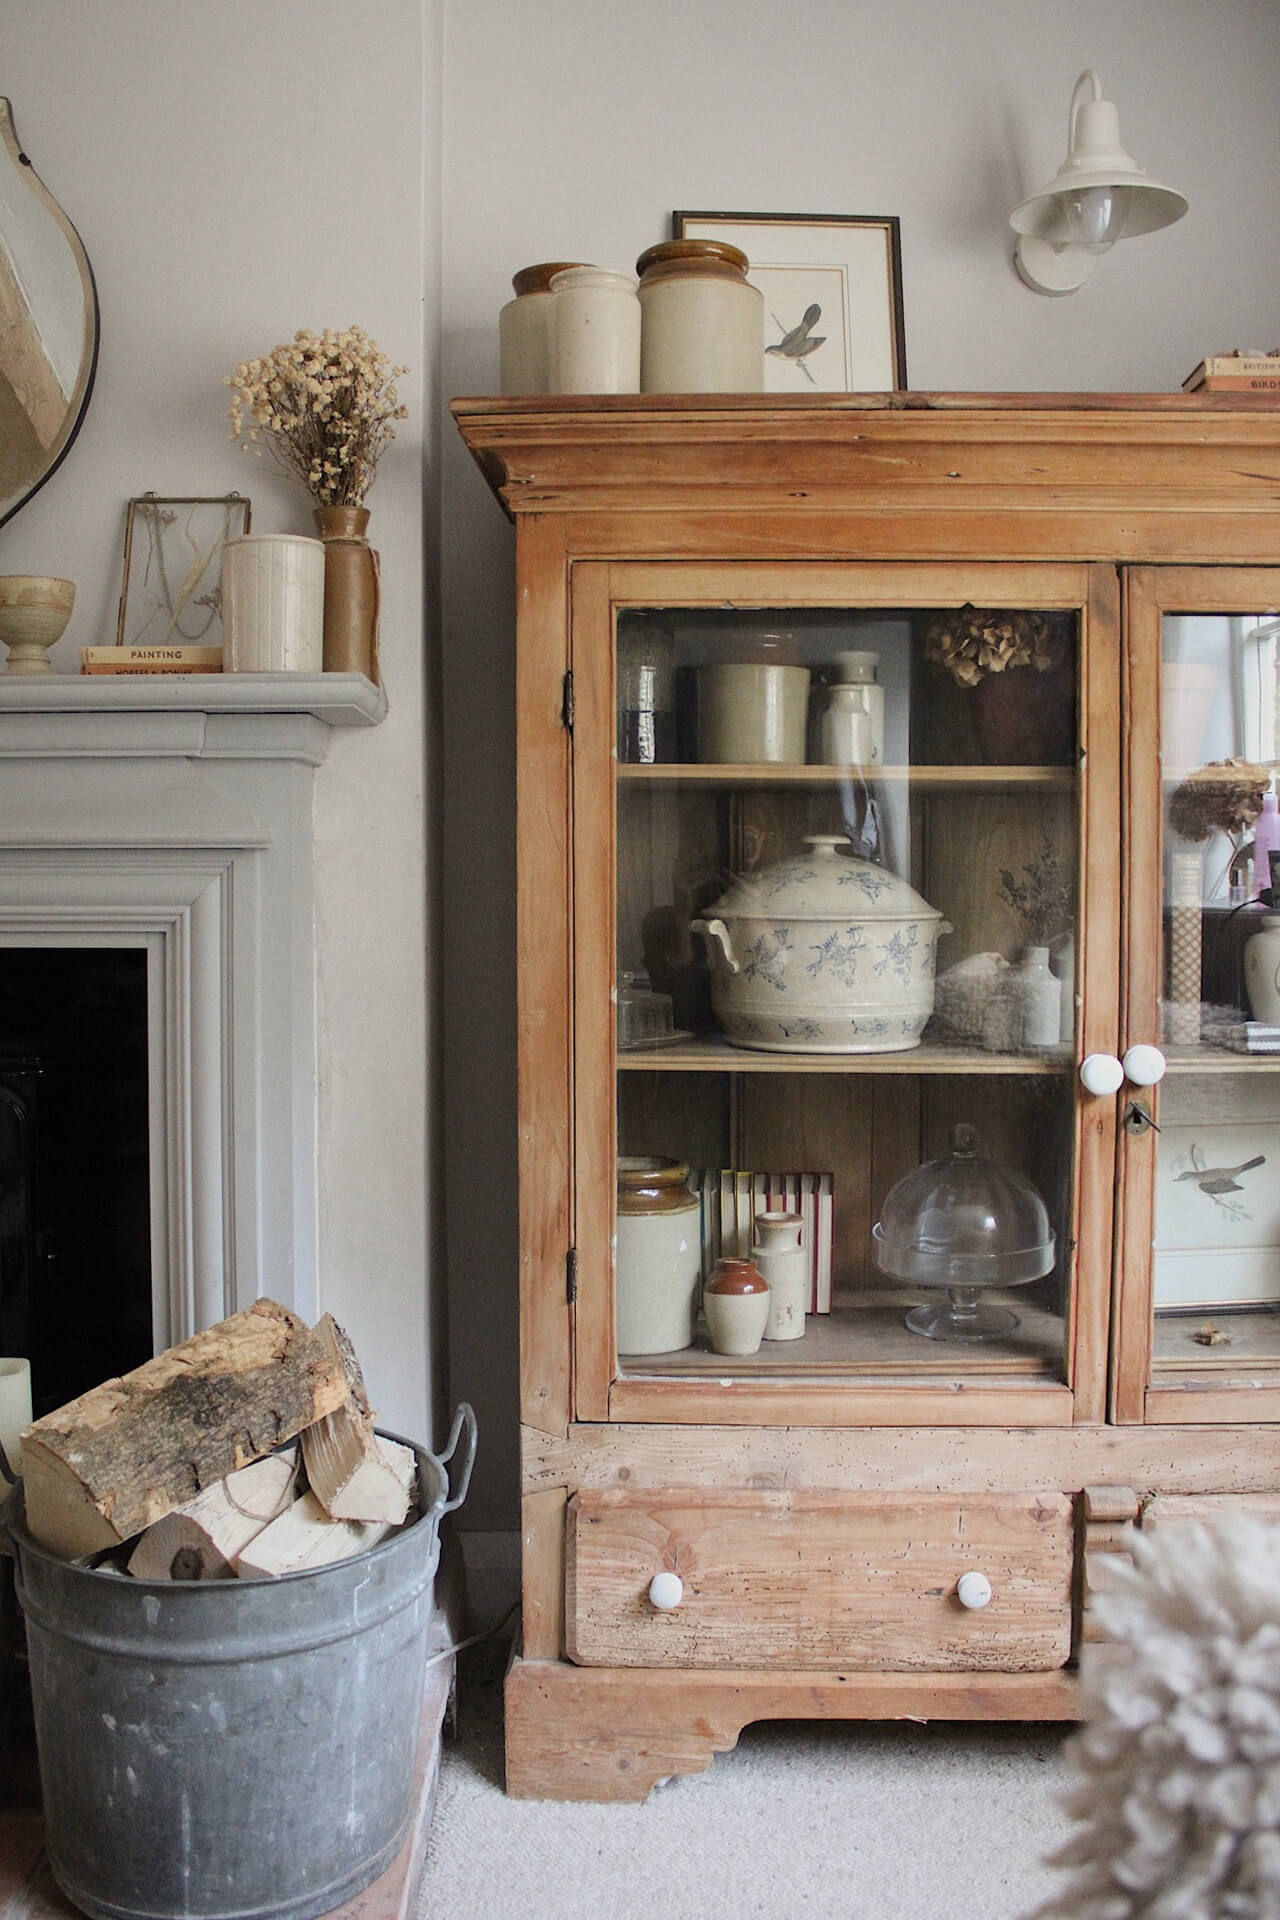 Home tour with Rachel Ashfield of @the_old_cottage - an old wooden glass-fronted dresser filled with vintage finds 